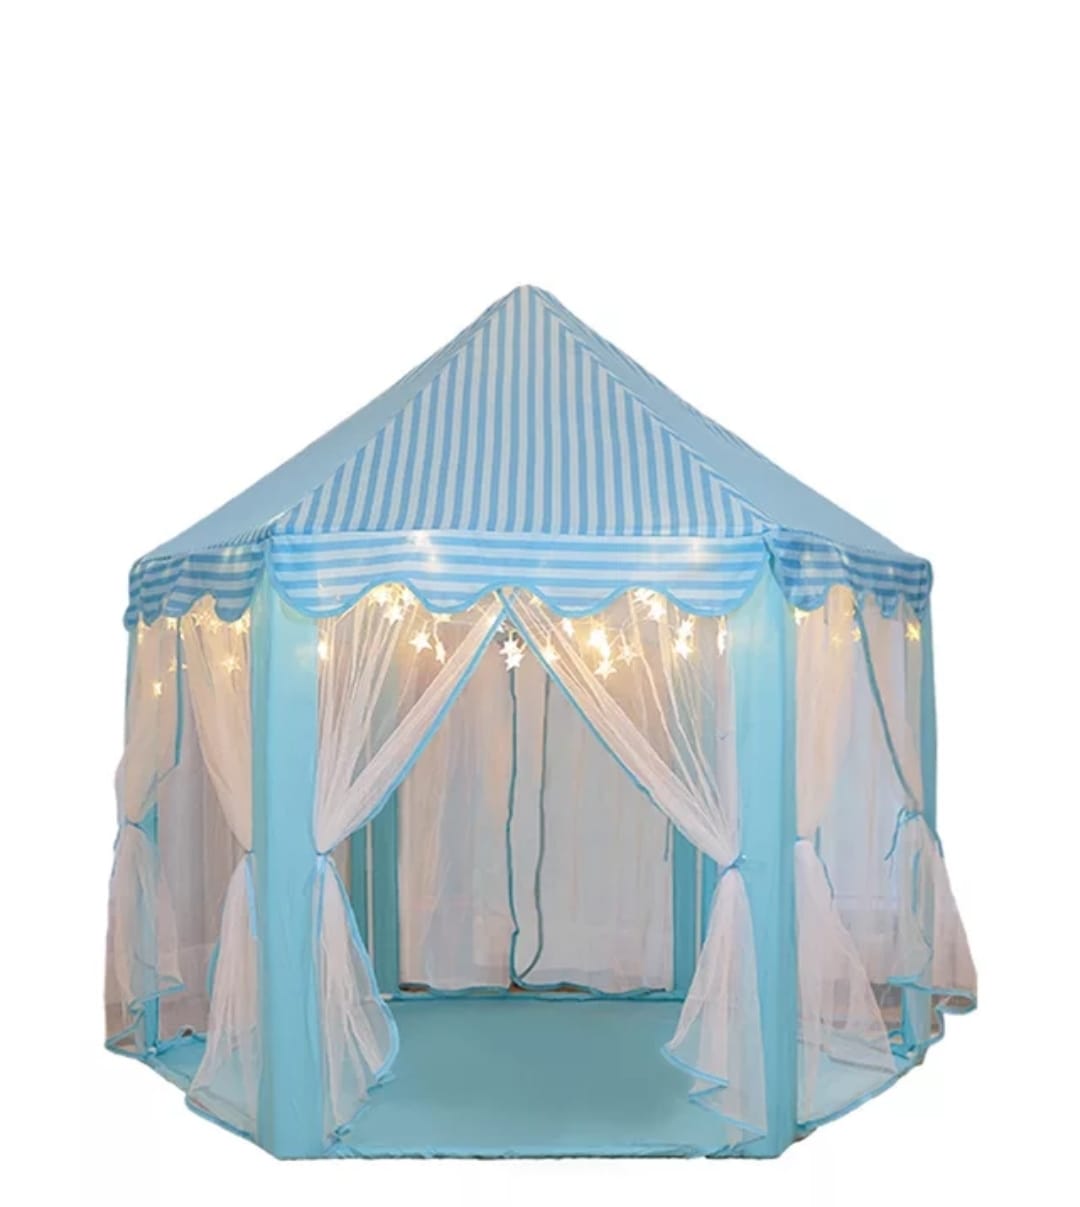 Princess Tent Girls Large Playhouse Kids Castle Play Tent Without Lights Toy for Children Indoor and Outdoor Games, 55'' x 54'' (HXD)-Blue